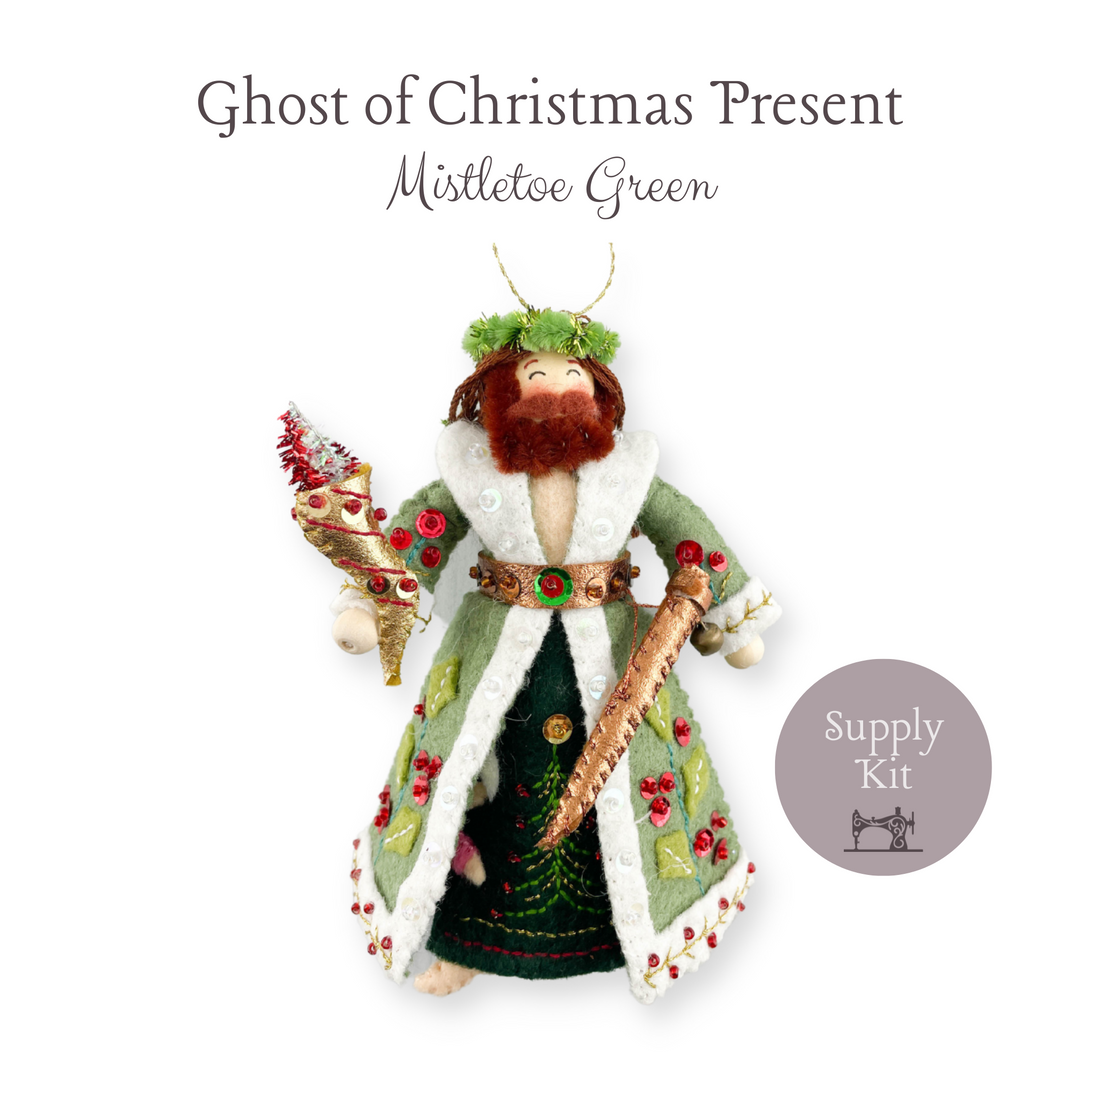 Ghost of Christmas Present Craft Kit